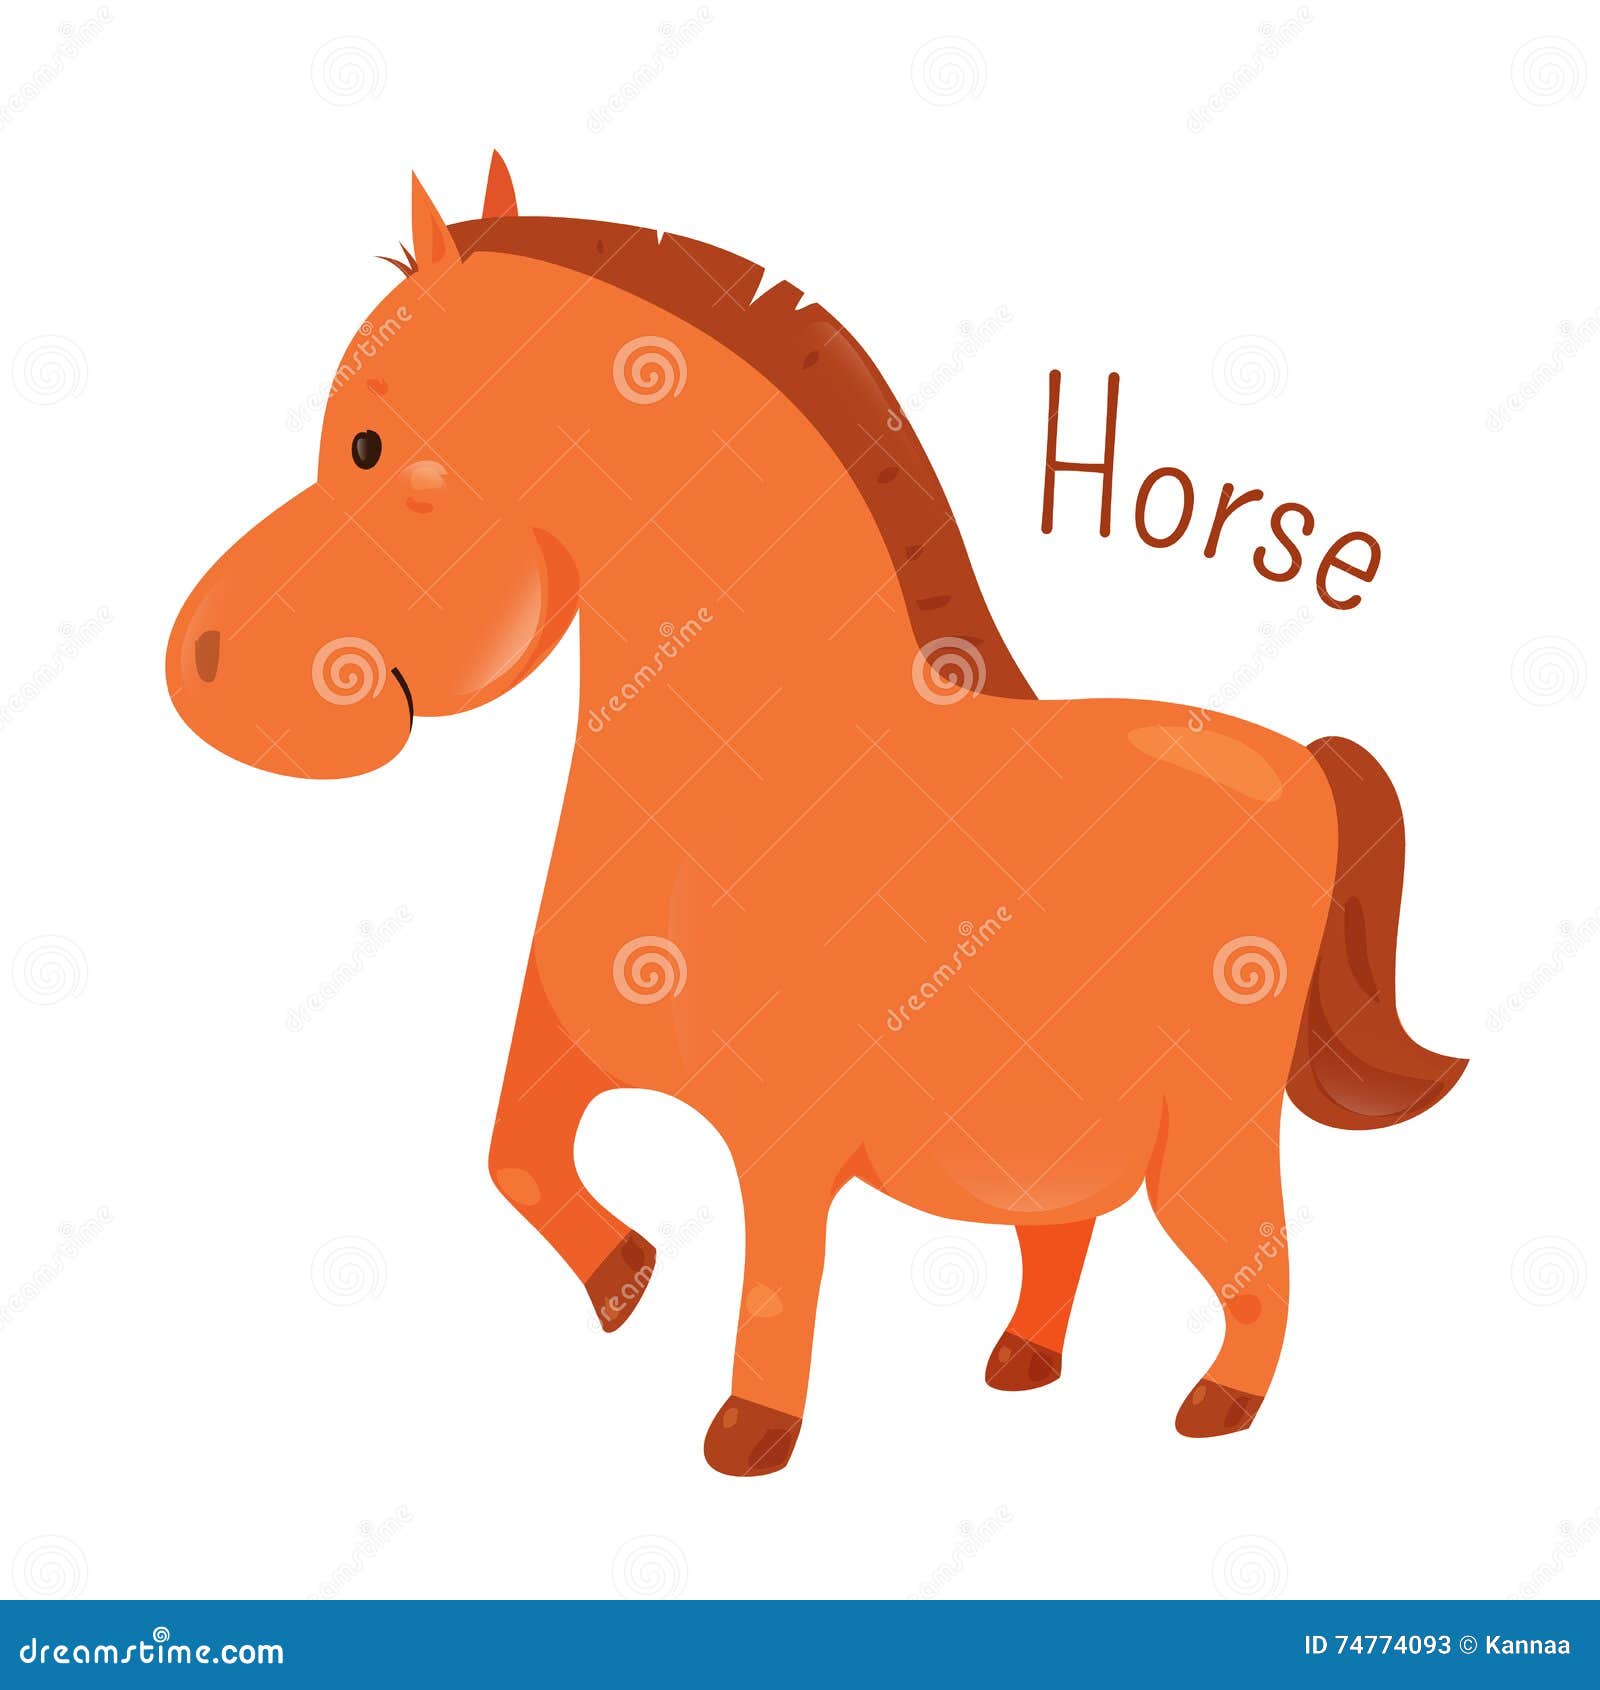 horse. domestic pets. sticker for kids.